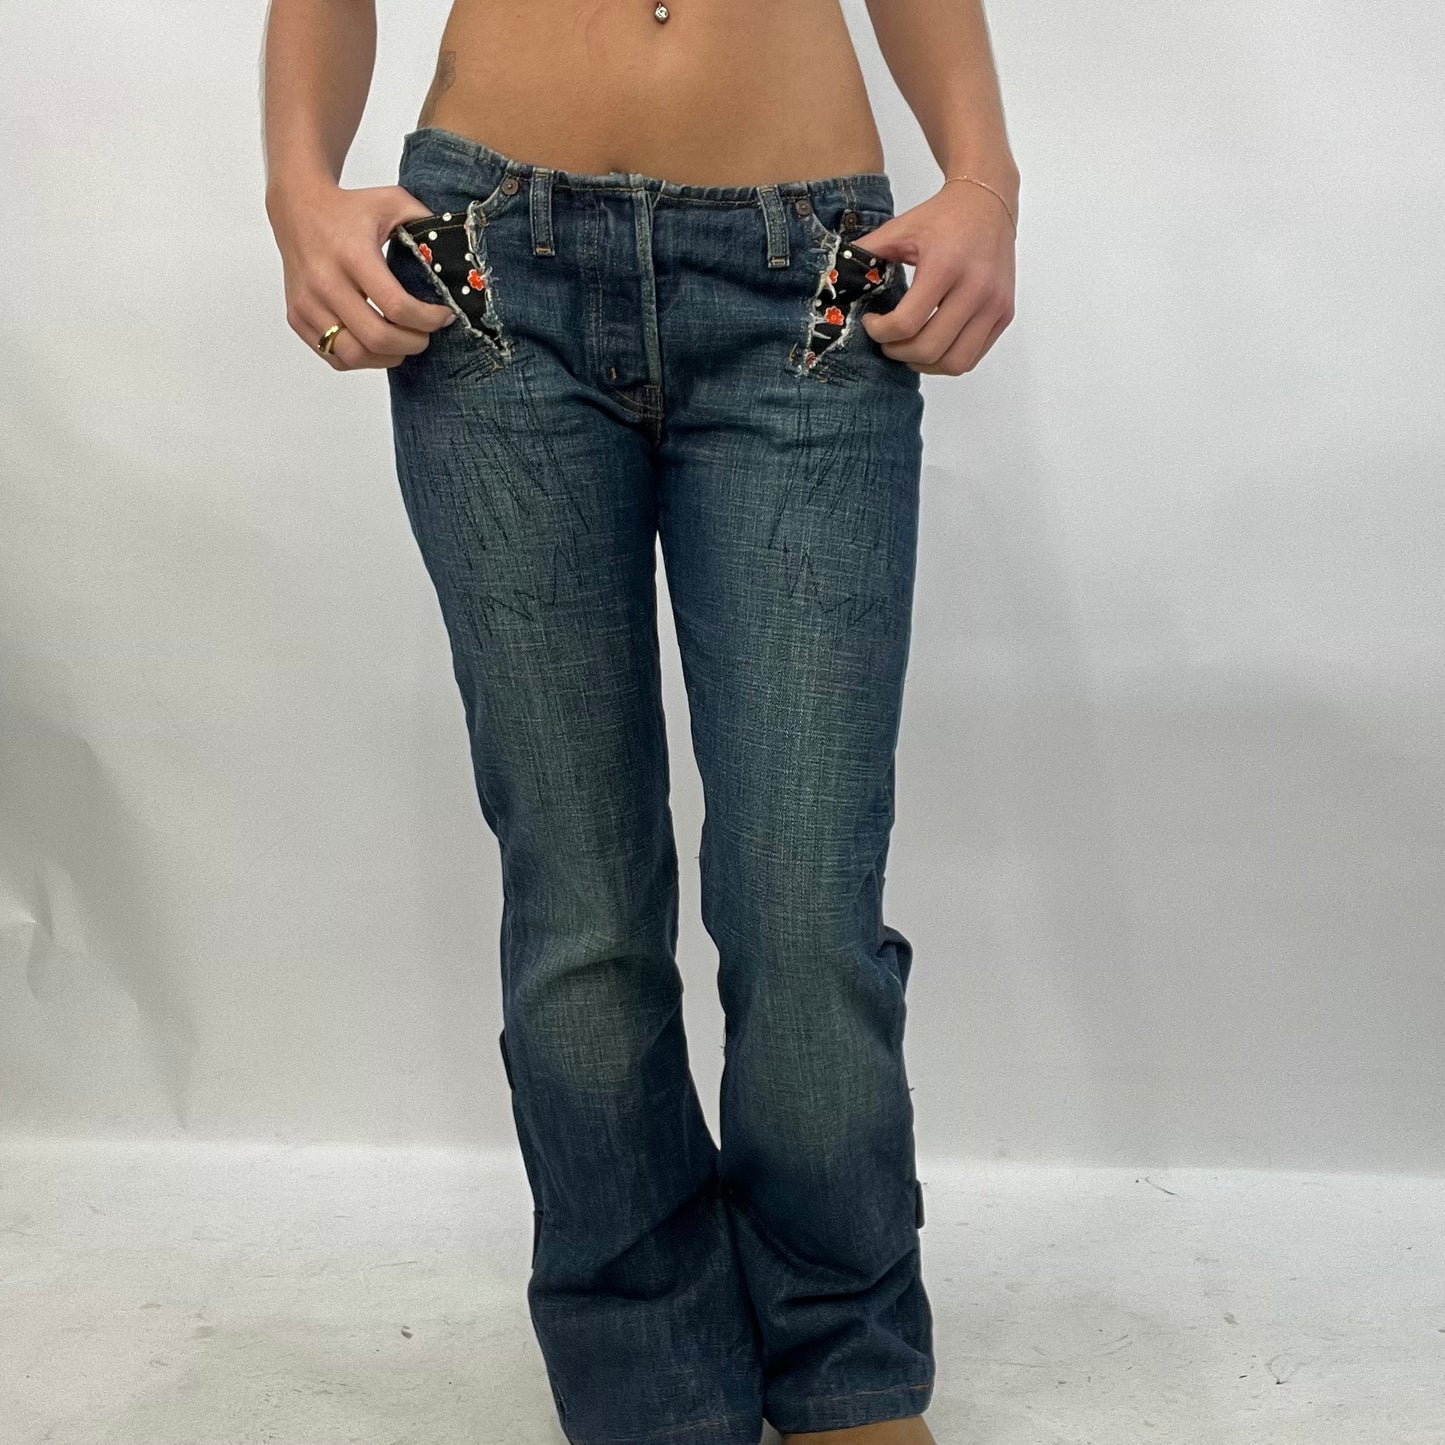 HIPPY CHIC DROP | small dark wash low waisted denim flared jeans with orange flower detail on pockets